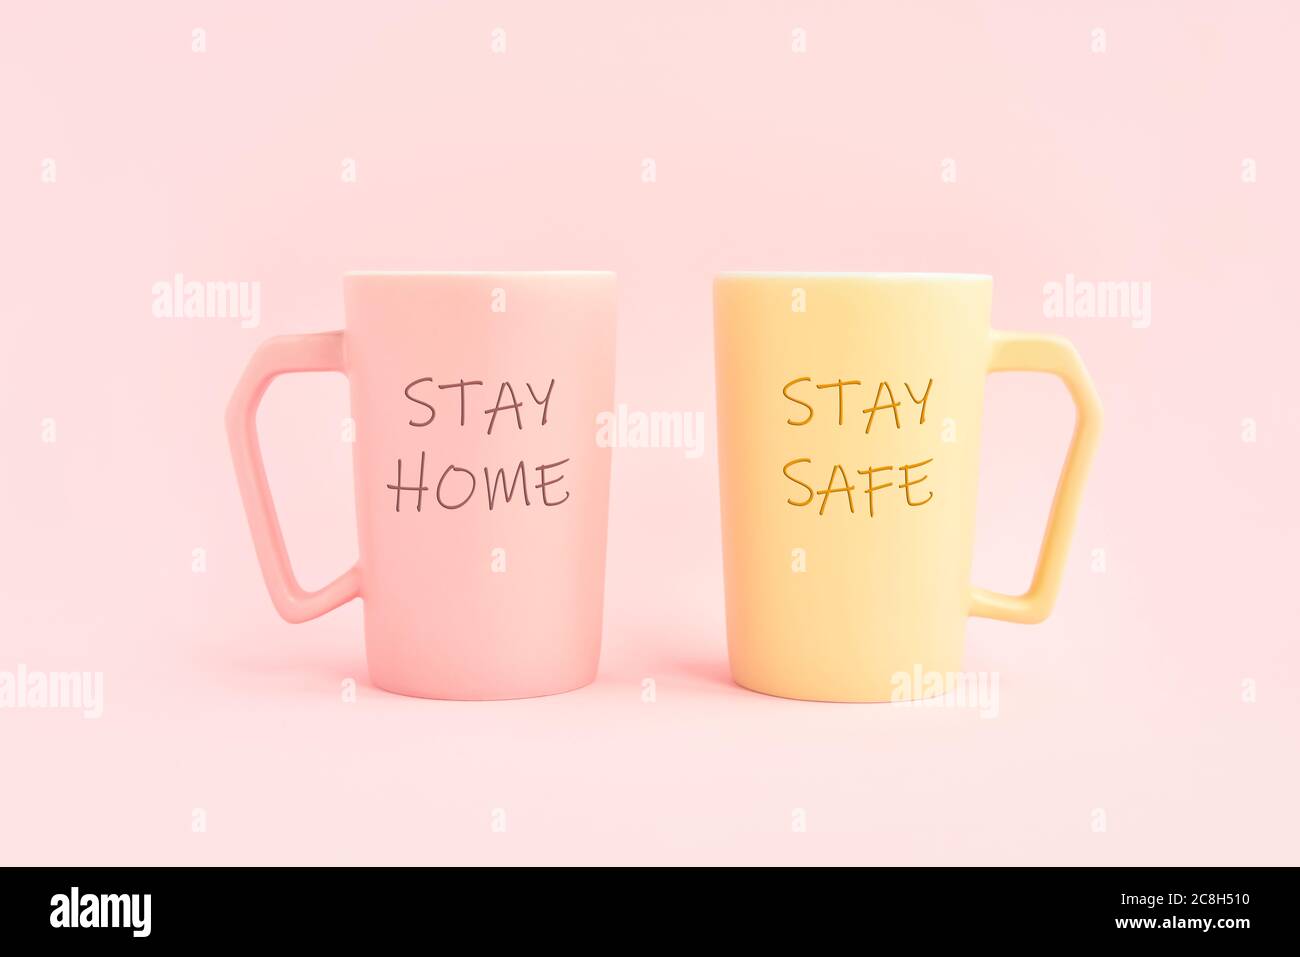 STAY HOME and STAY SAFE written on two cups of coffee on a pink background. Healthcare, medical and quarantine concept. Copy space for text Stock Photo